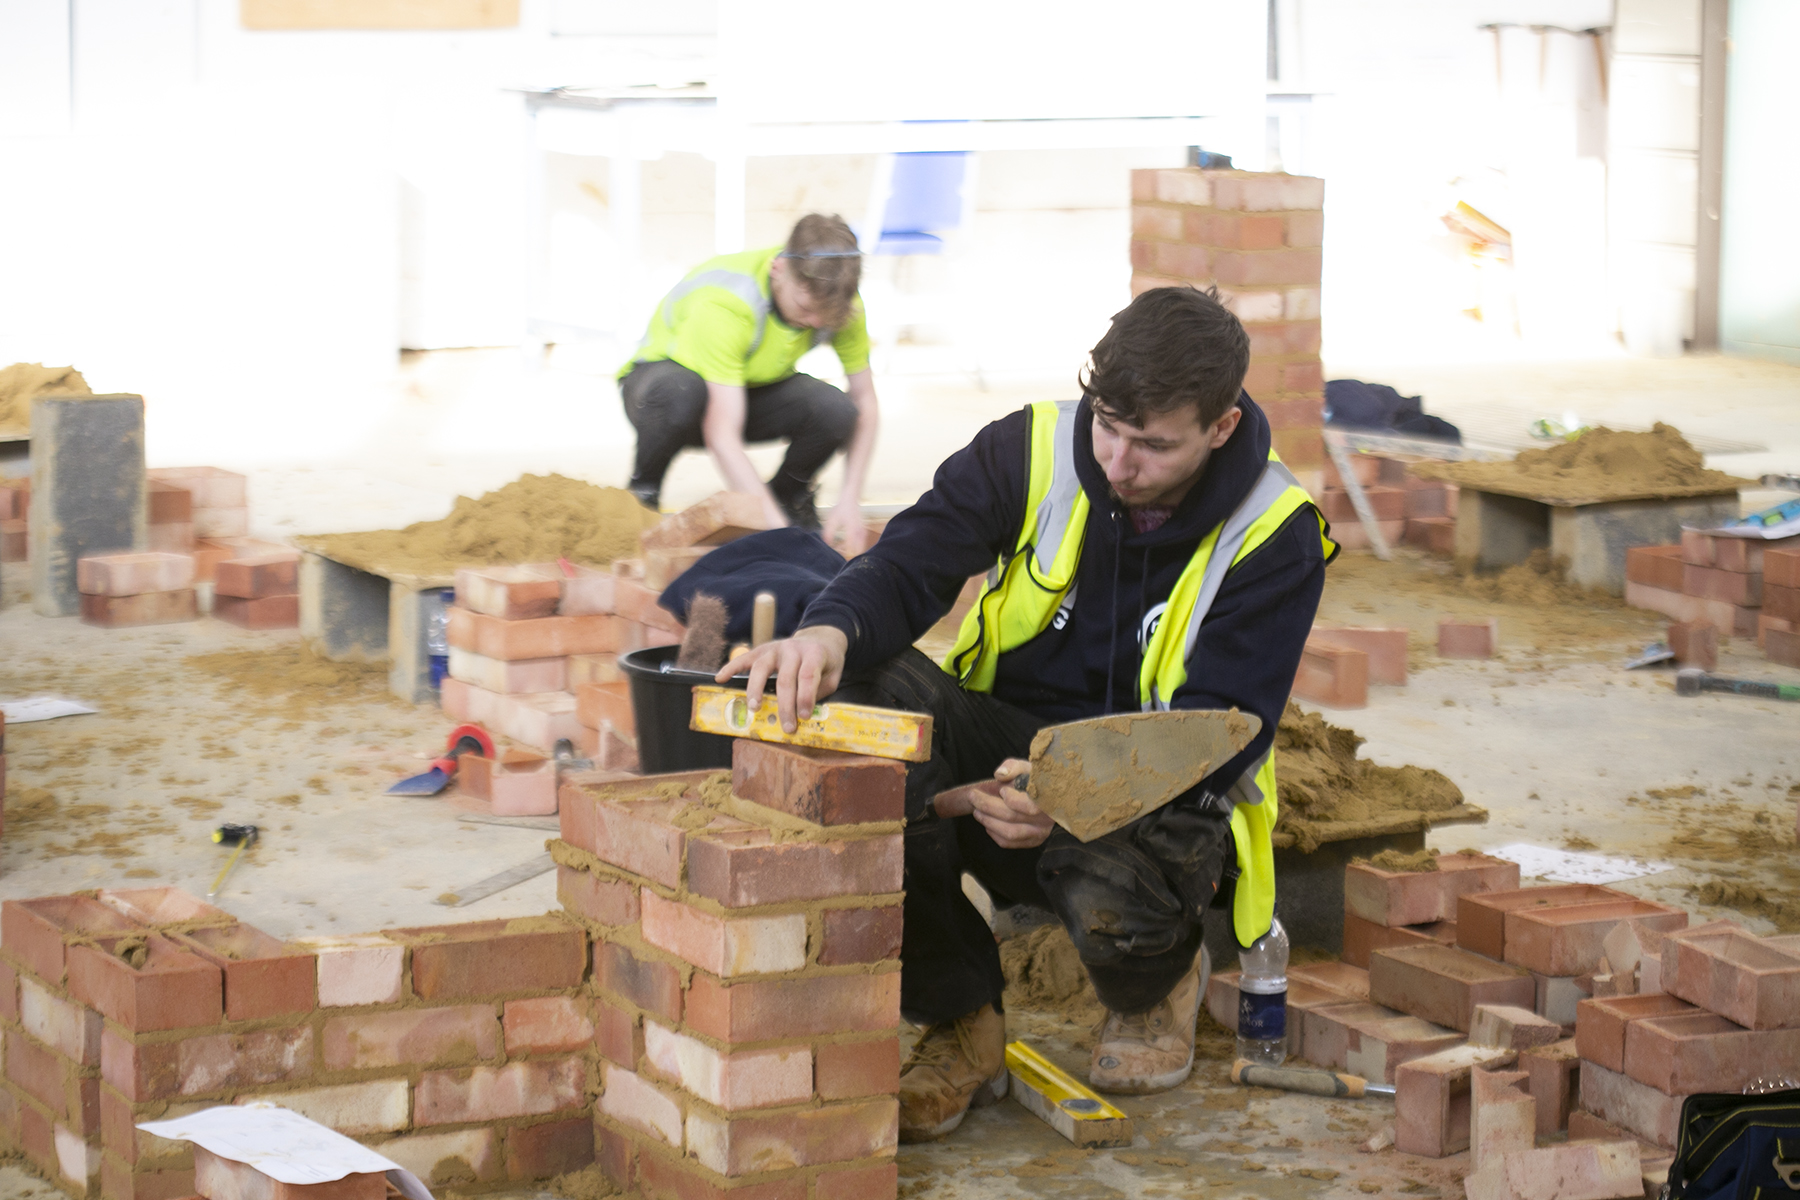 Image shows a student laying bricks as part of a skills competition.